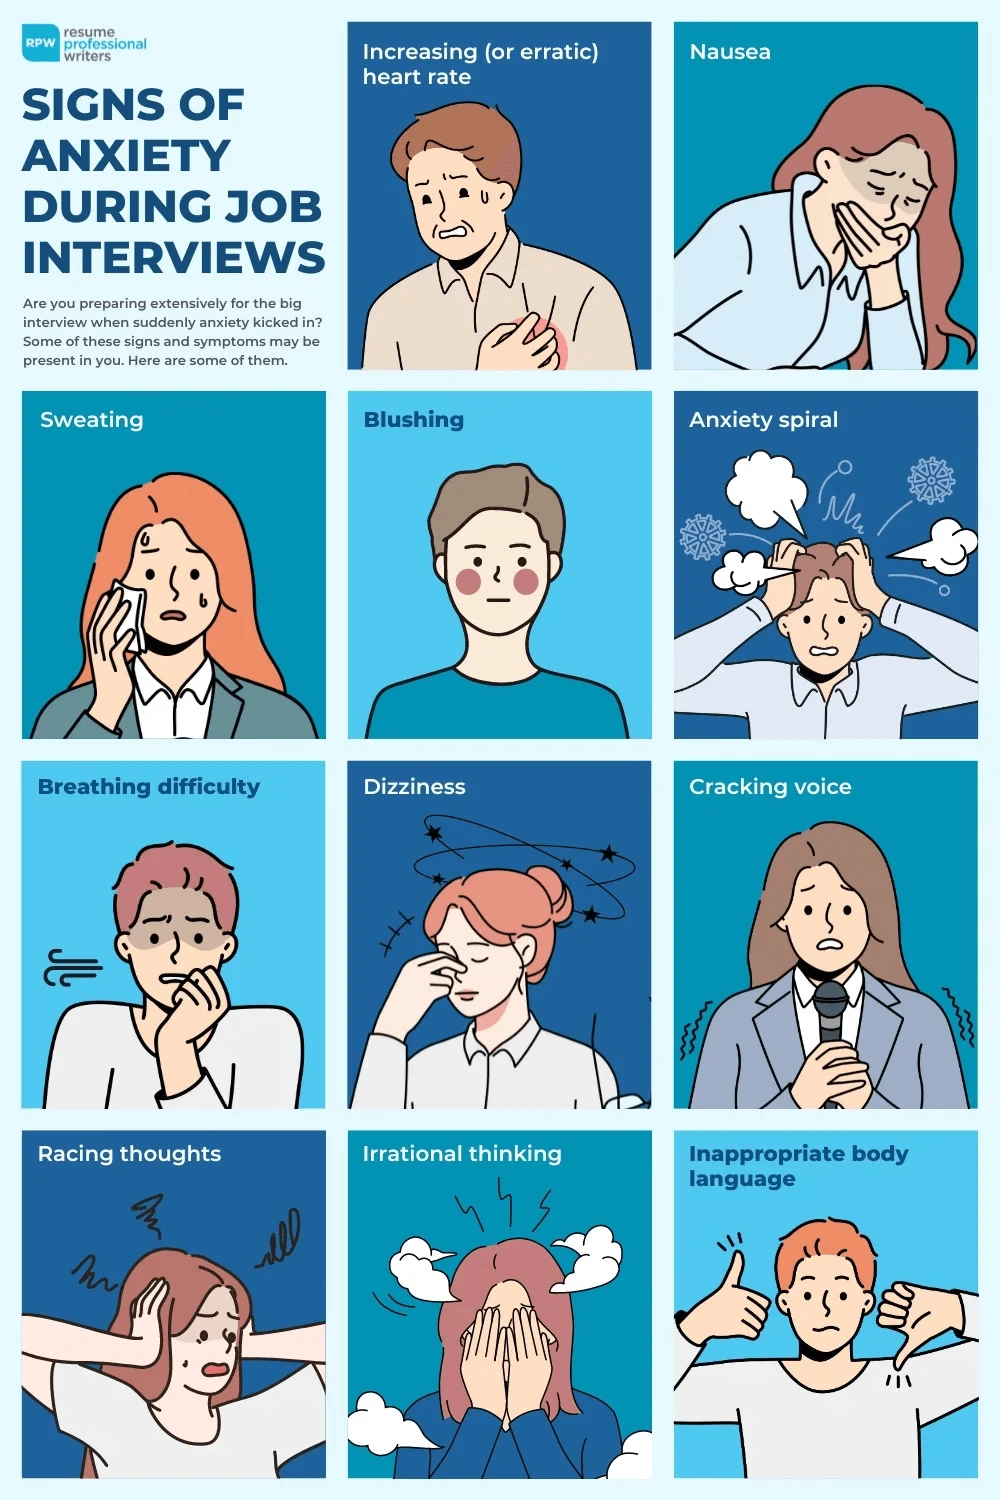 Signs Of Anxiety During Job Interviews Infographic